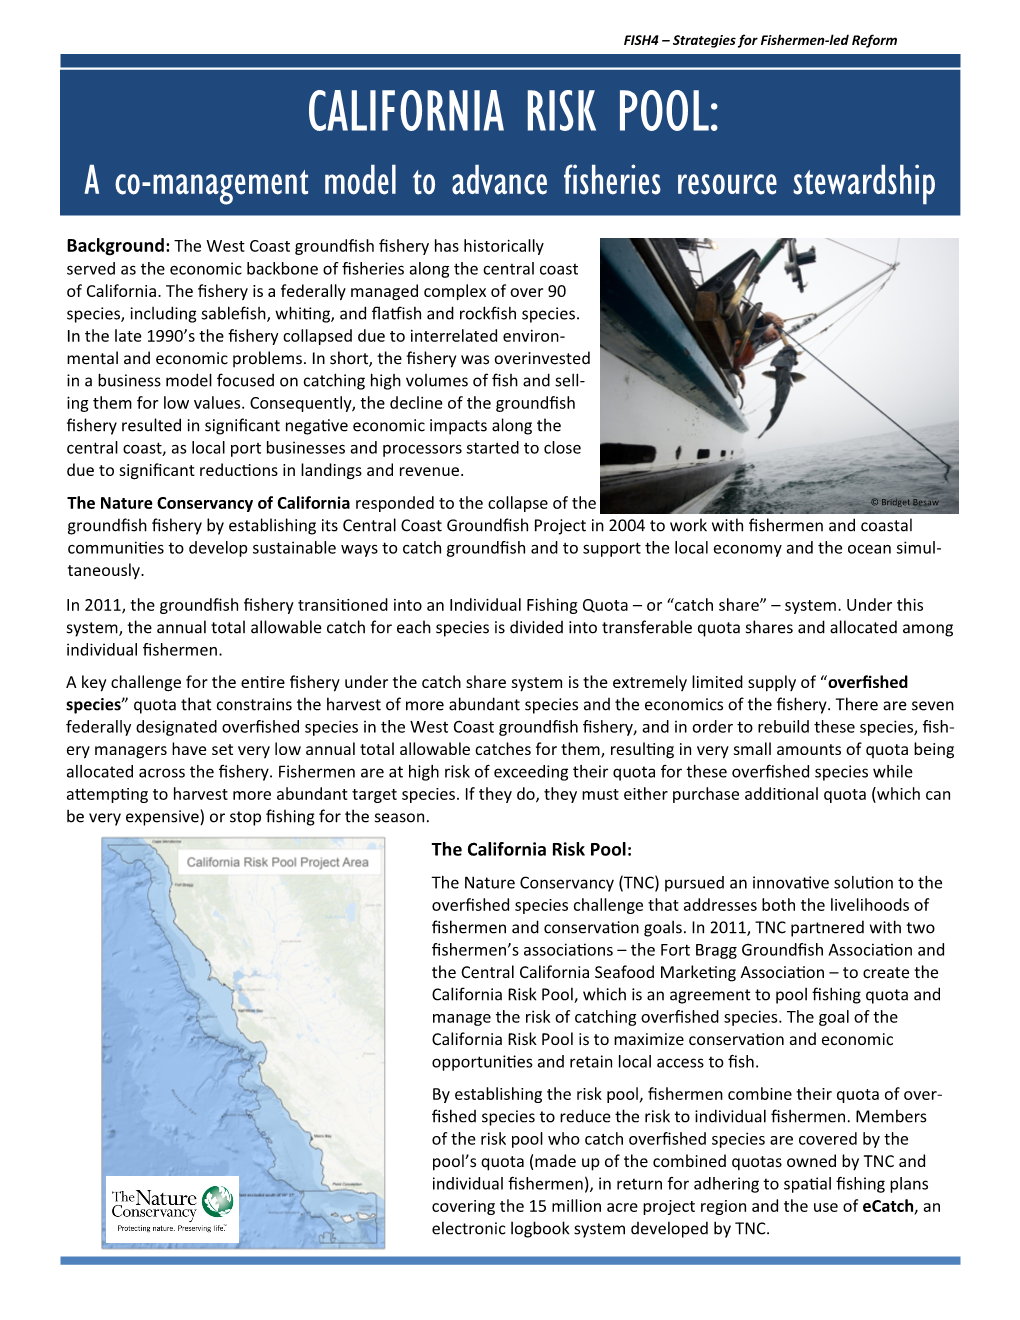 CALIFORNIA RISK POOL: a Co-Management Model to Advance Fisheries Resource Stewardship